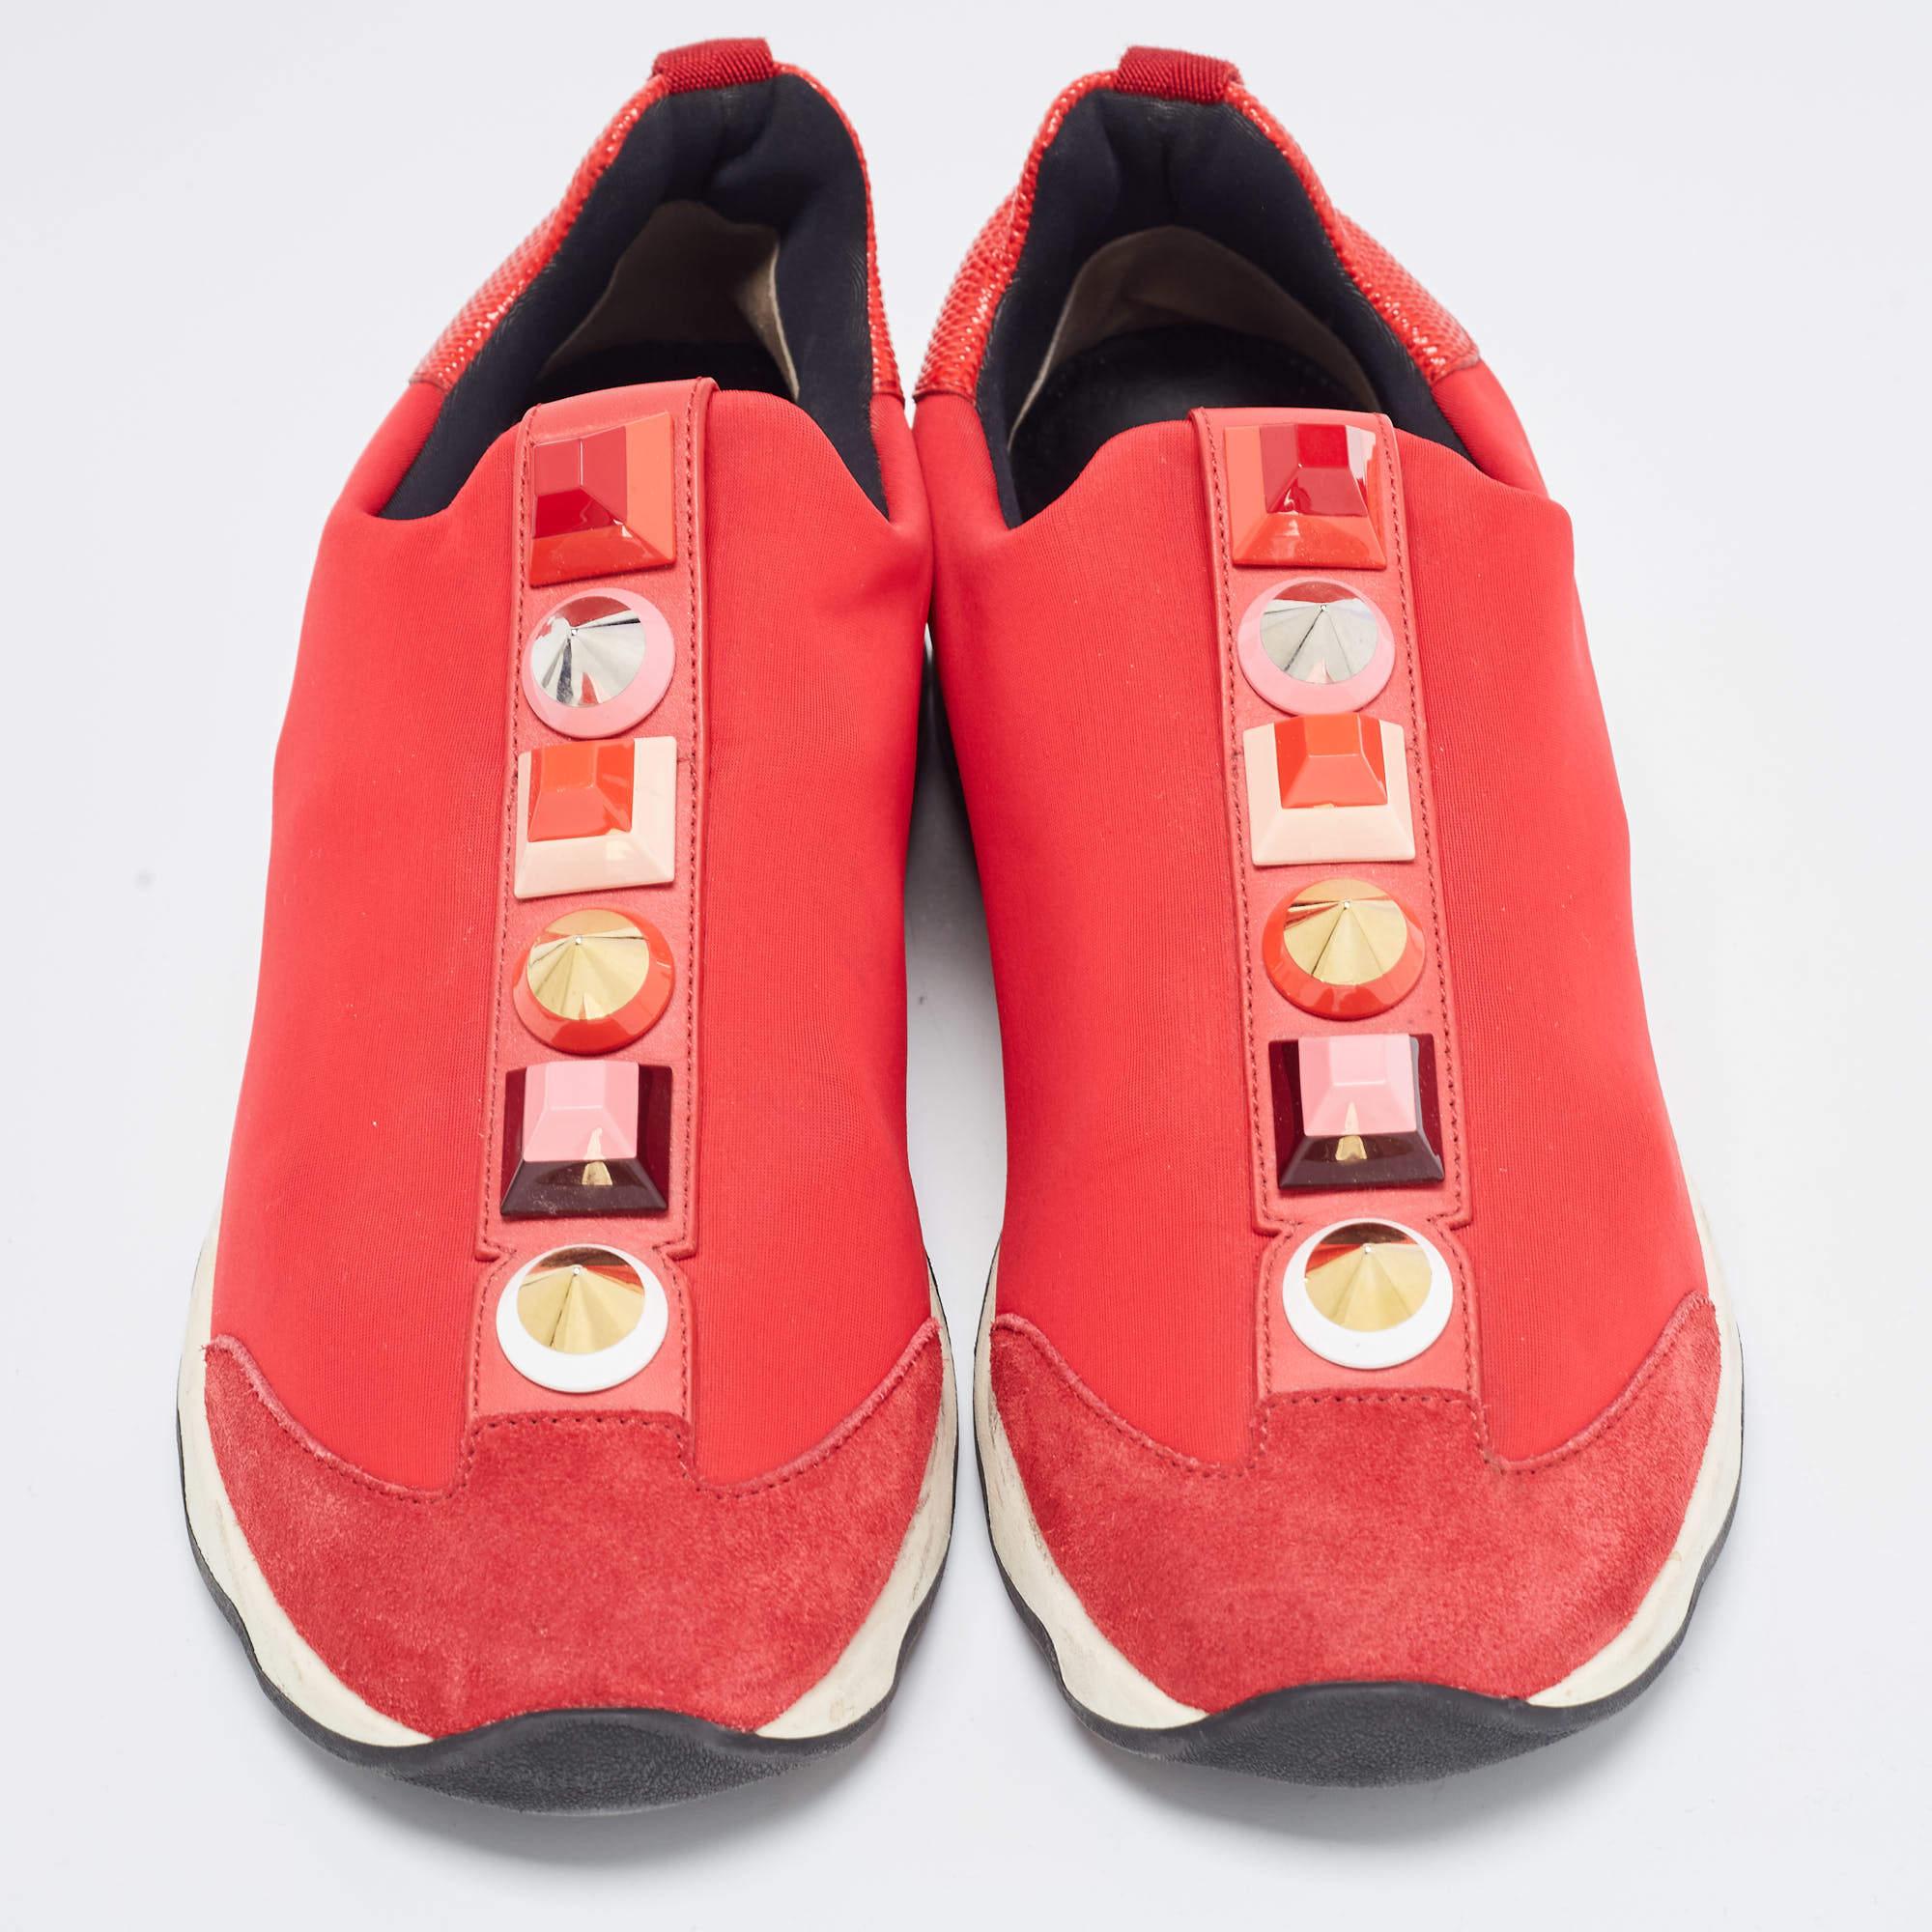 Fendi Red/Brown Neoprene and Lizard Embossed Leather Studded Slip On Sneakers Si In Good Condition For Sale In Dubai, Al Qouz 2